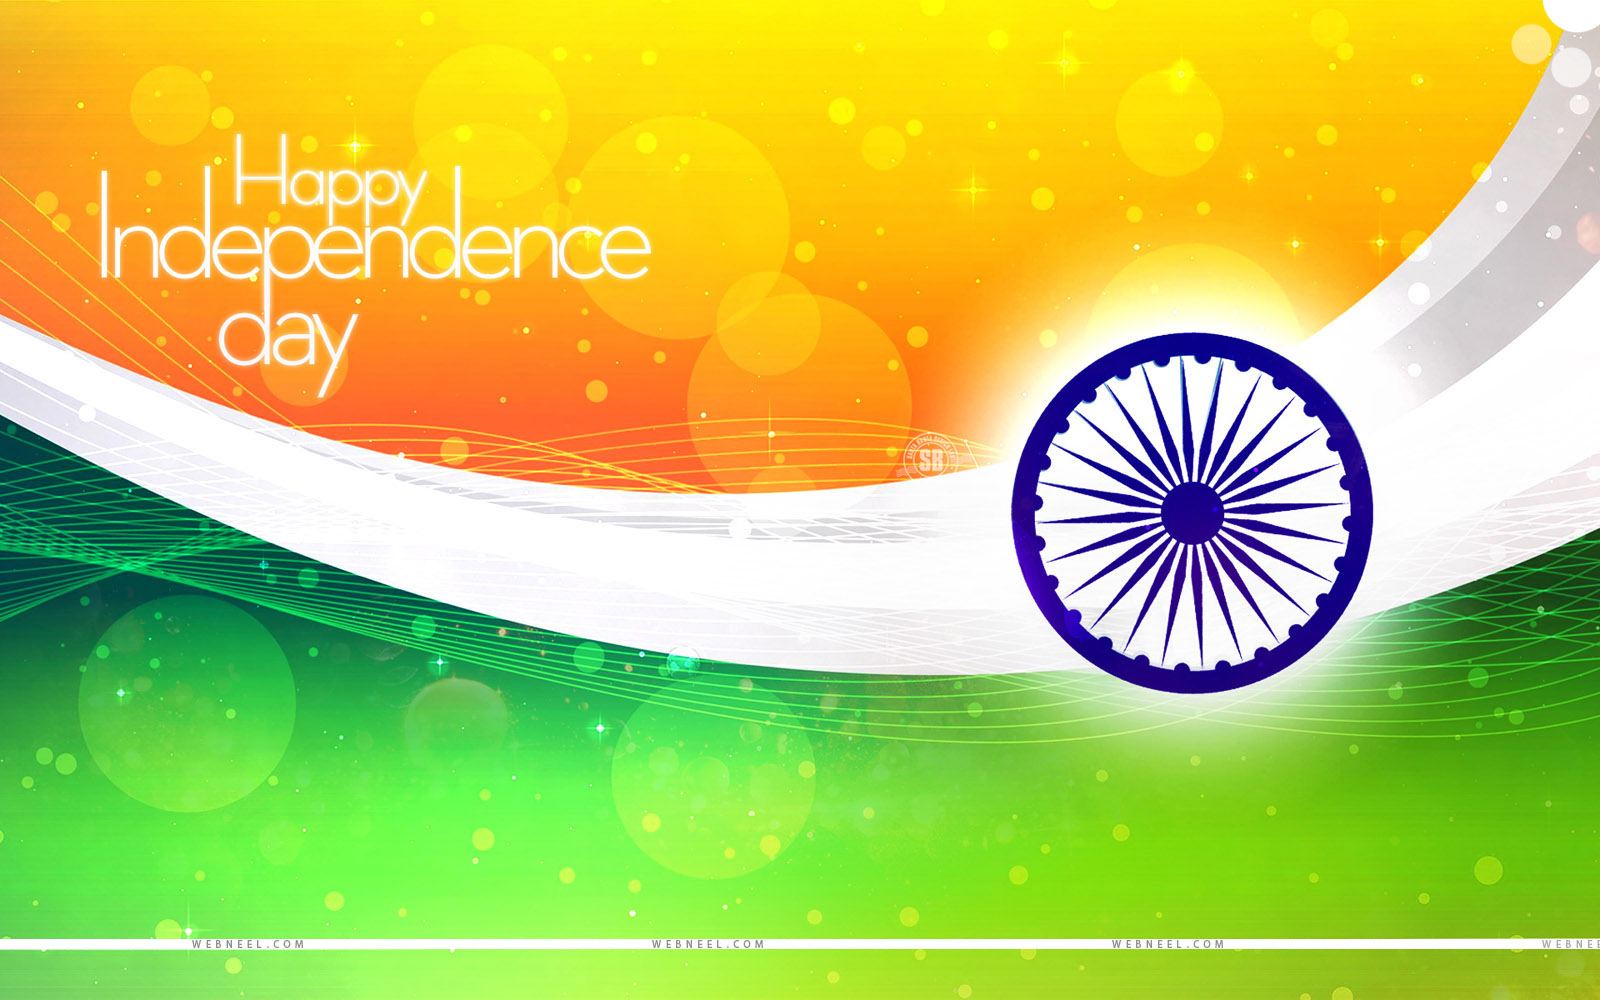 25 Indian Independence Day Wallpapers and Wishes Web Revisions